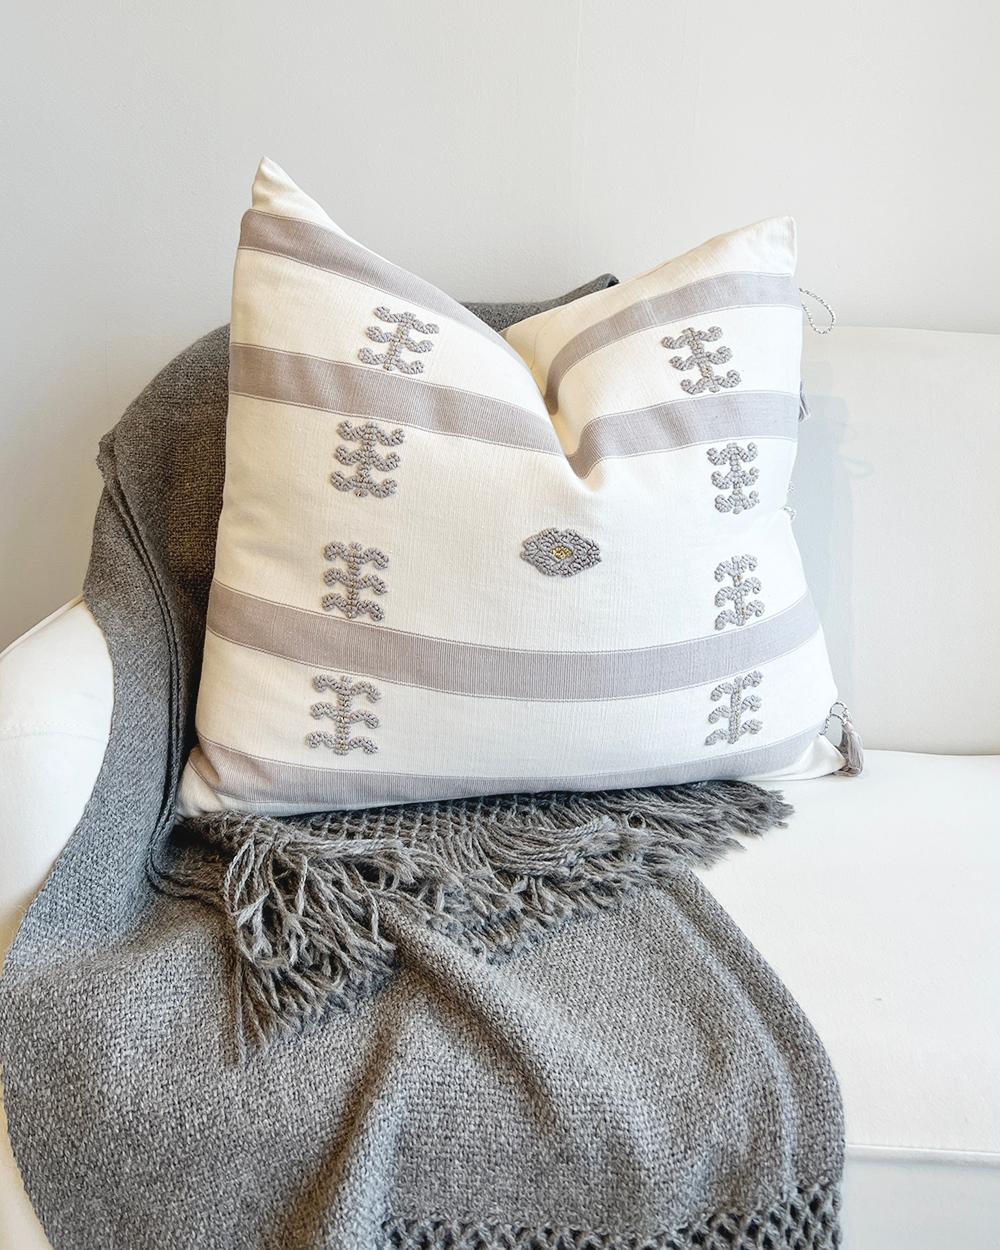 This handcrafted Mexican-inspired fair trade cotton throw pillow adds style and comfort to any space. The minimalist design features a white background with elegant gray embroidery and rustic accents, evoking a modern and cozy atmosphere. Add a